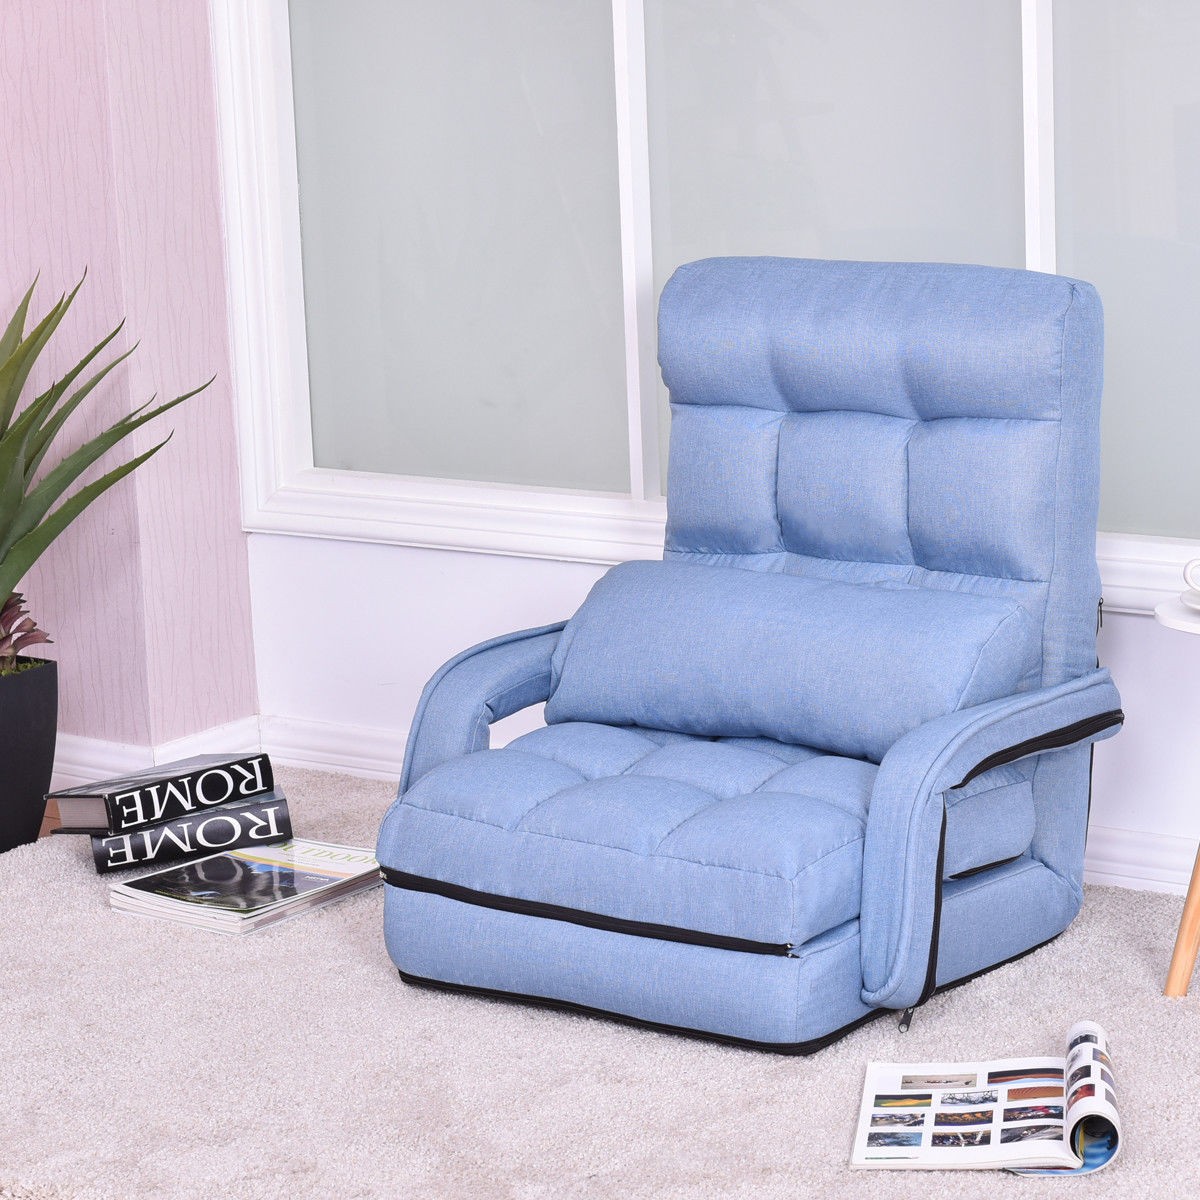 Folding Lazy Floor Chair Sofa With Armrests And Pillow